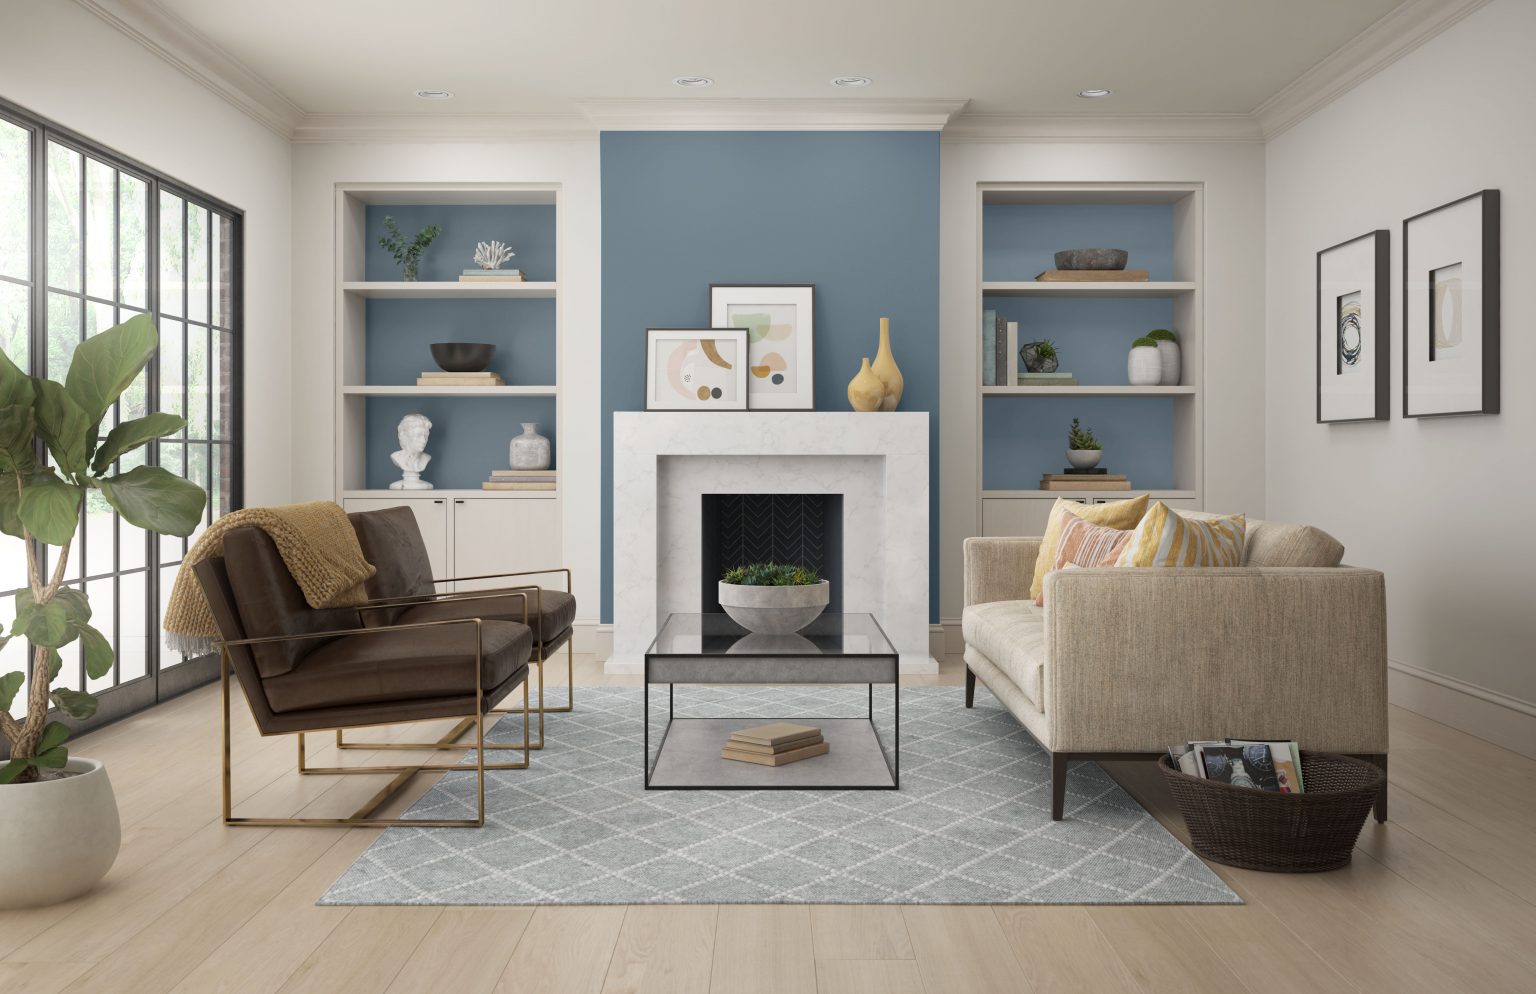 A contemporary living room with an accent wall painted in Adirondack Blue